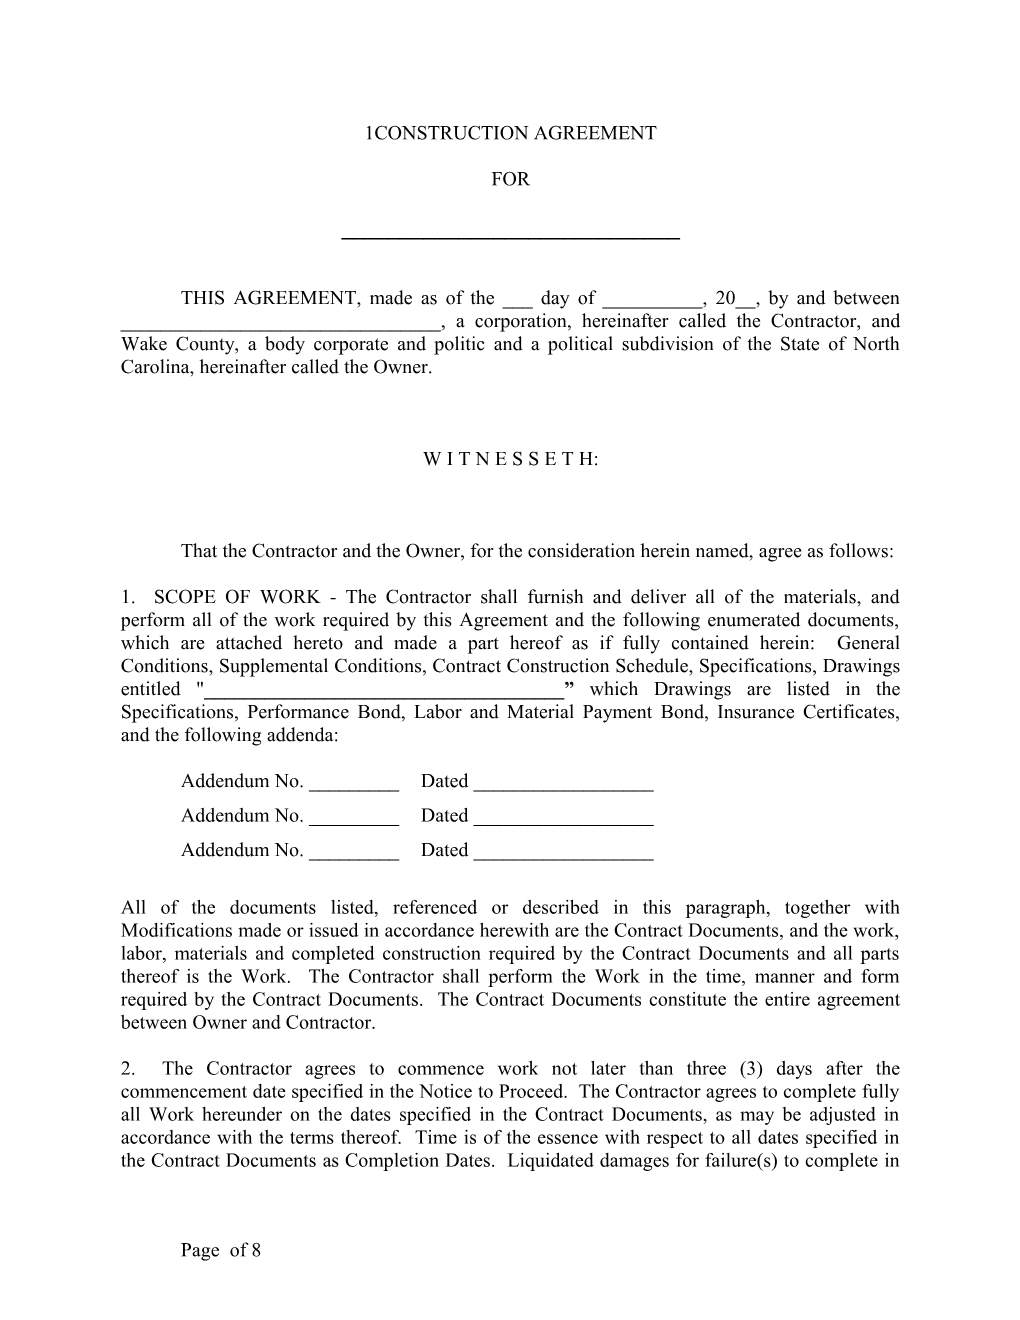 Formal Construction Agreement with Bonds